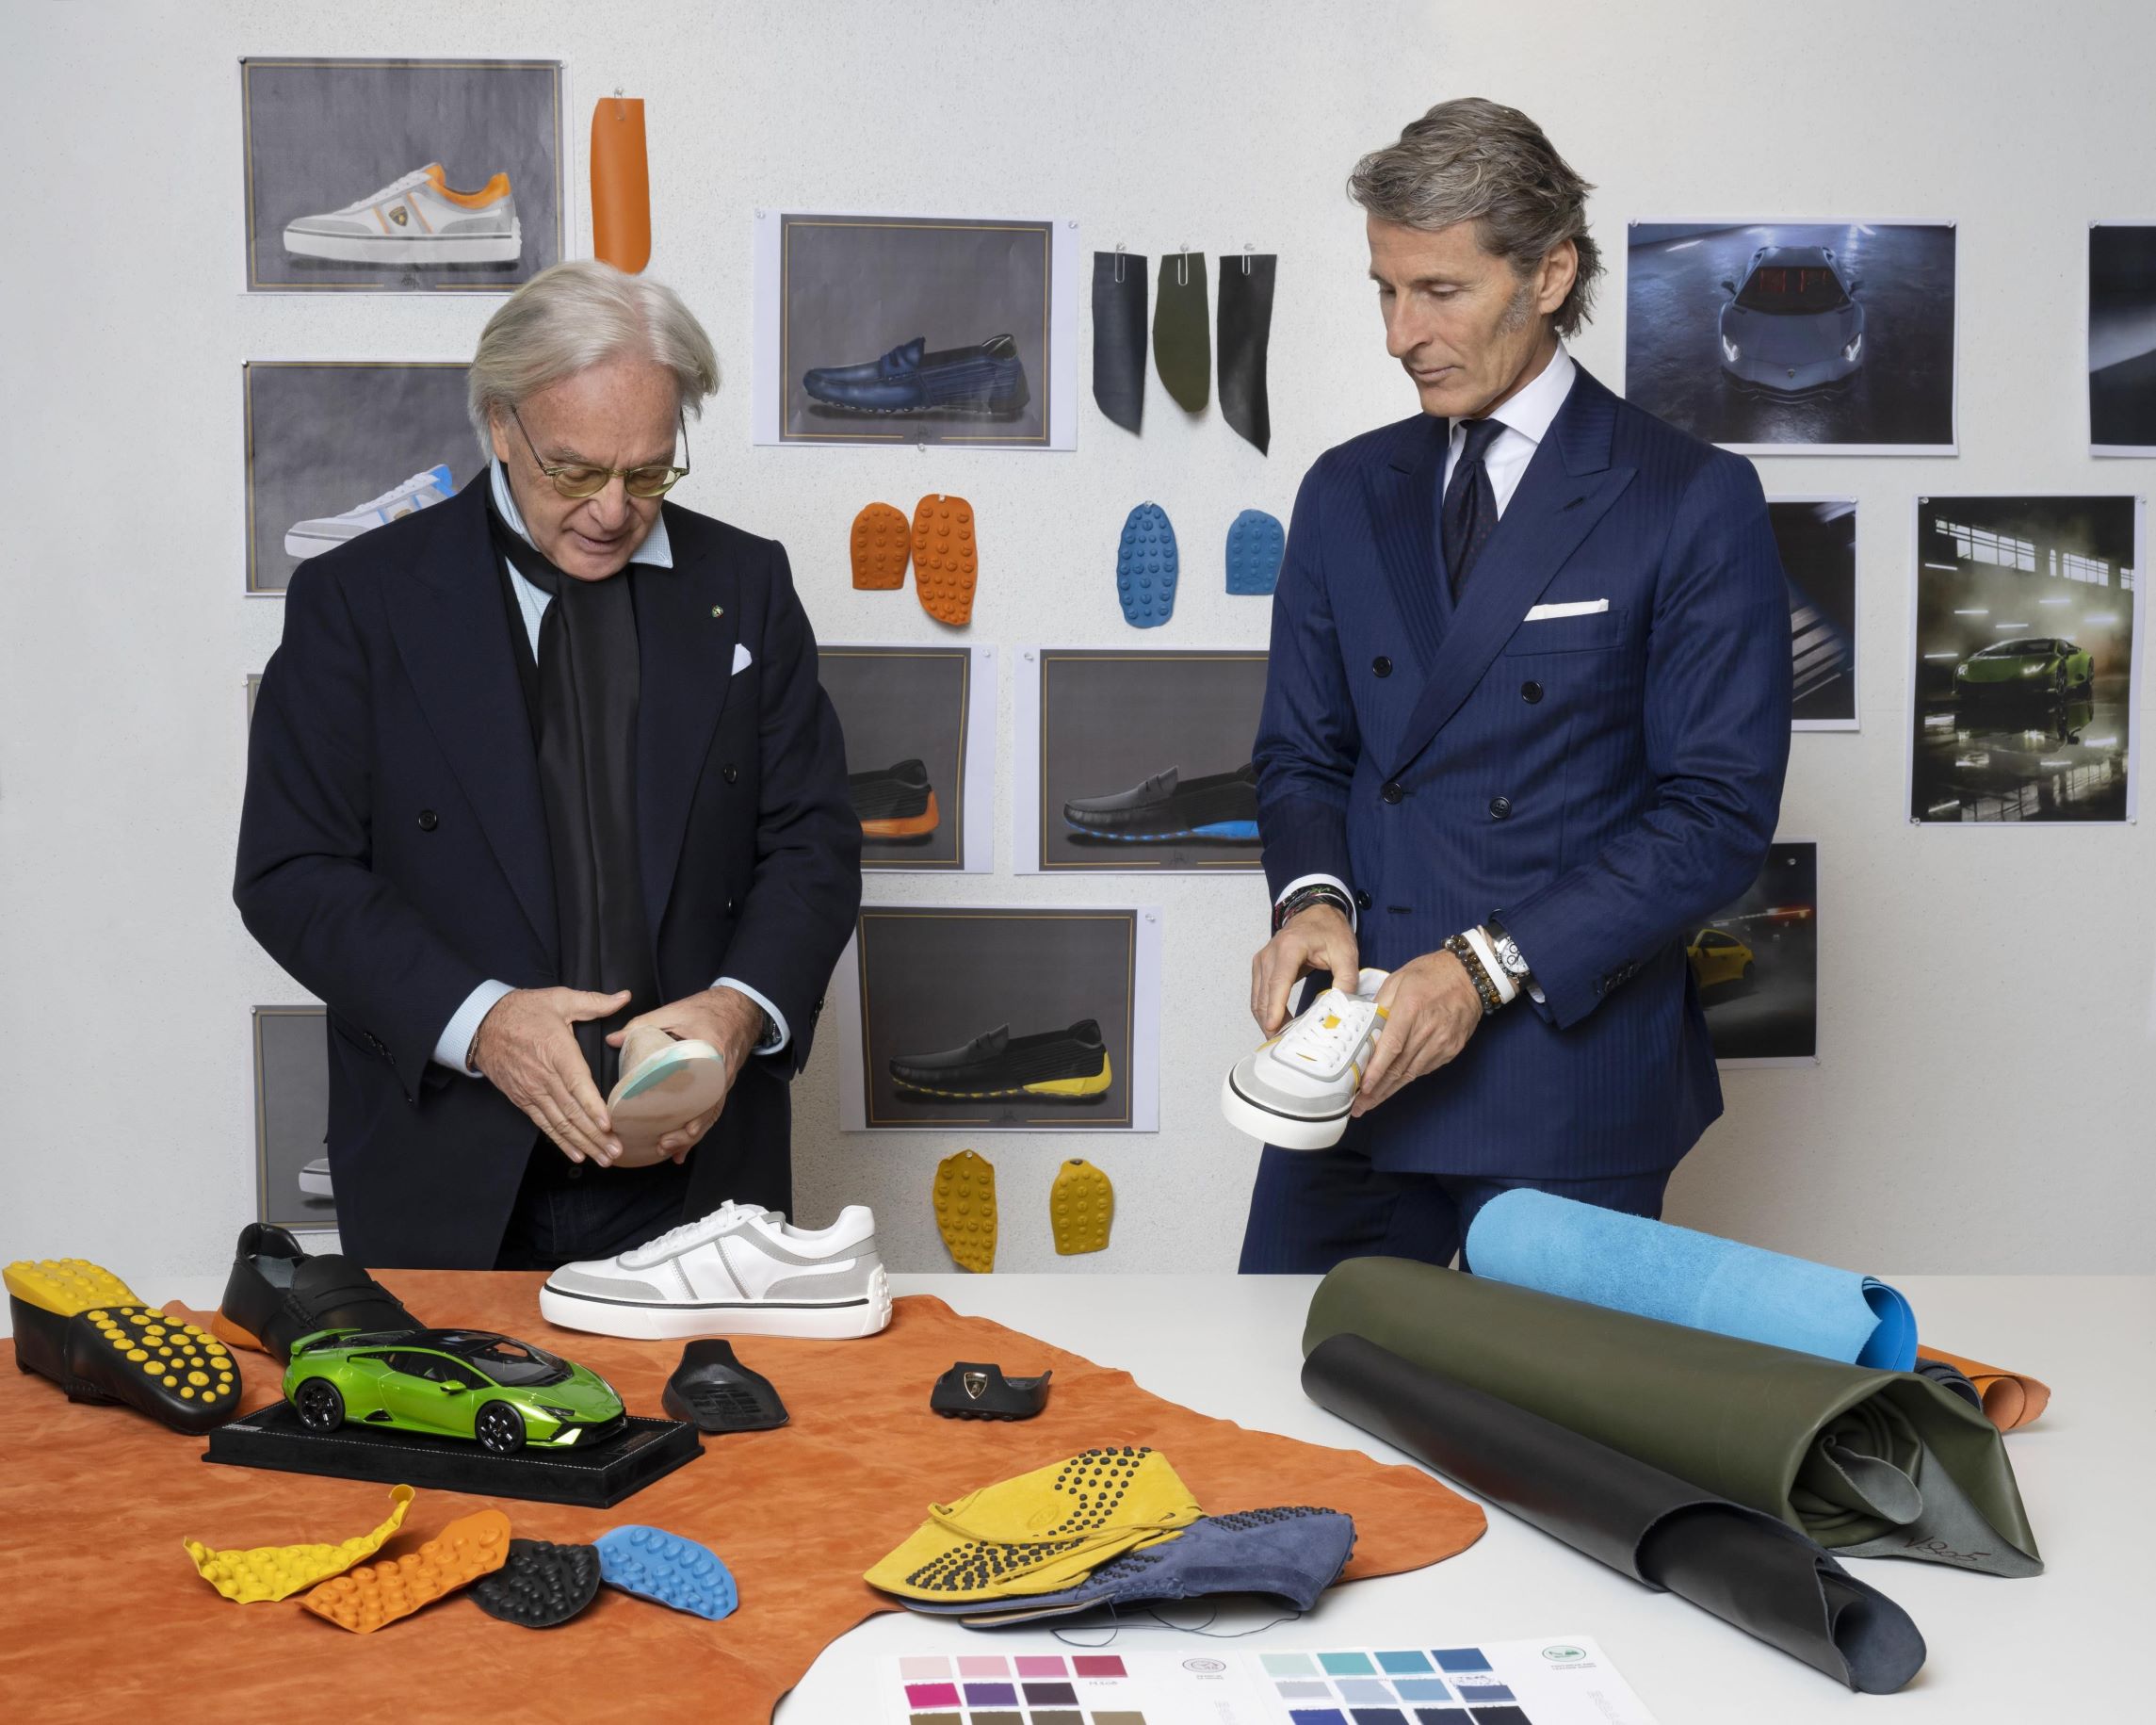 Stephan Winkelmann, CEO of Lamborghini pictured on the right and Diego della Valle, CEO of Tod's Group pictured on left.